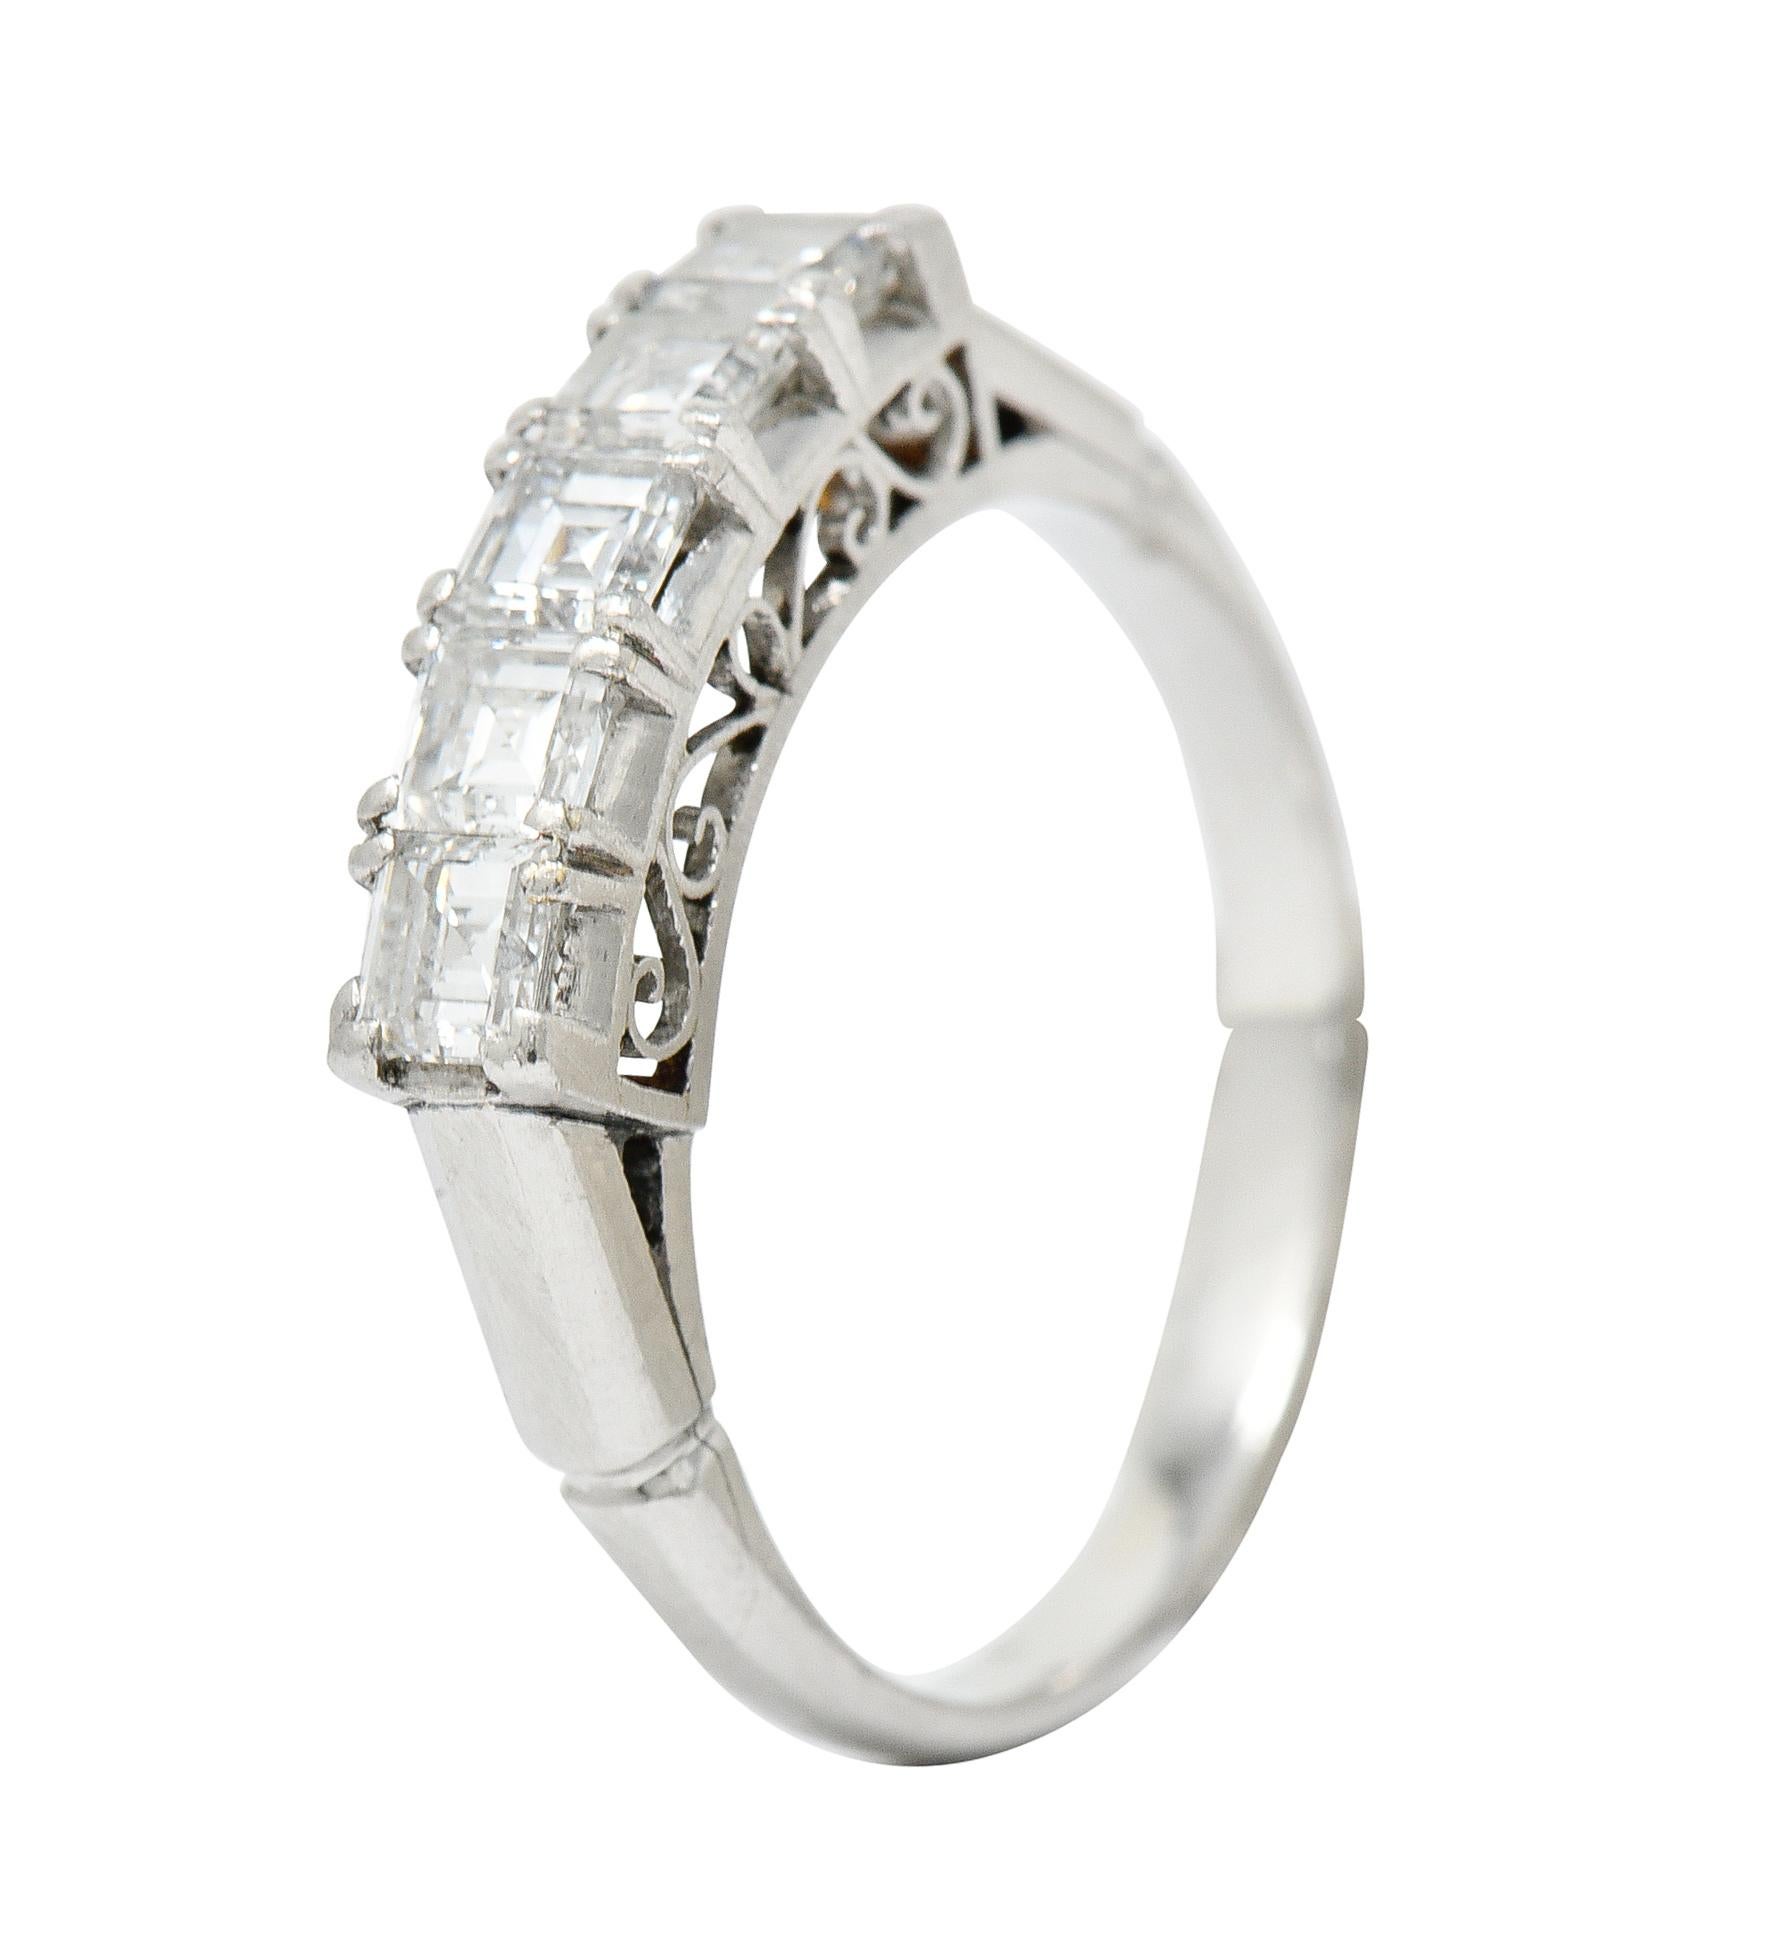 Endearing 0.78 Carat Diamond Platinum Five Stone Band Ring For Sale 3